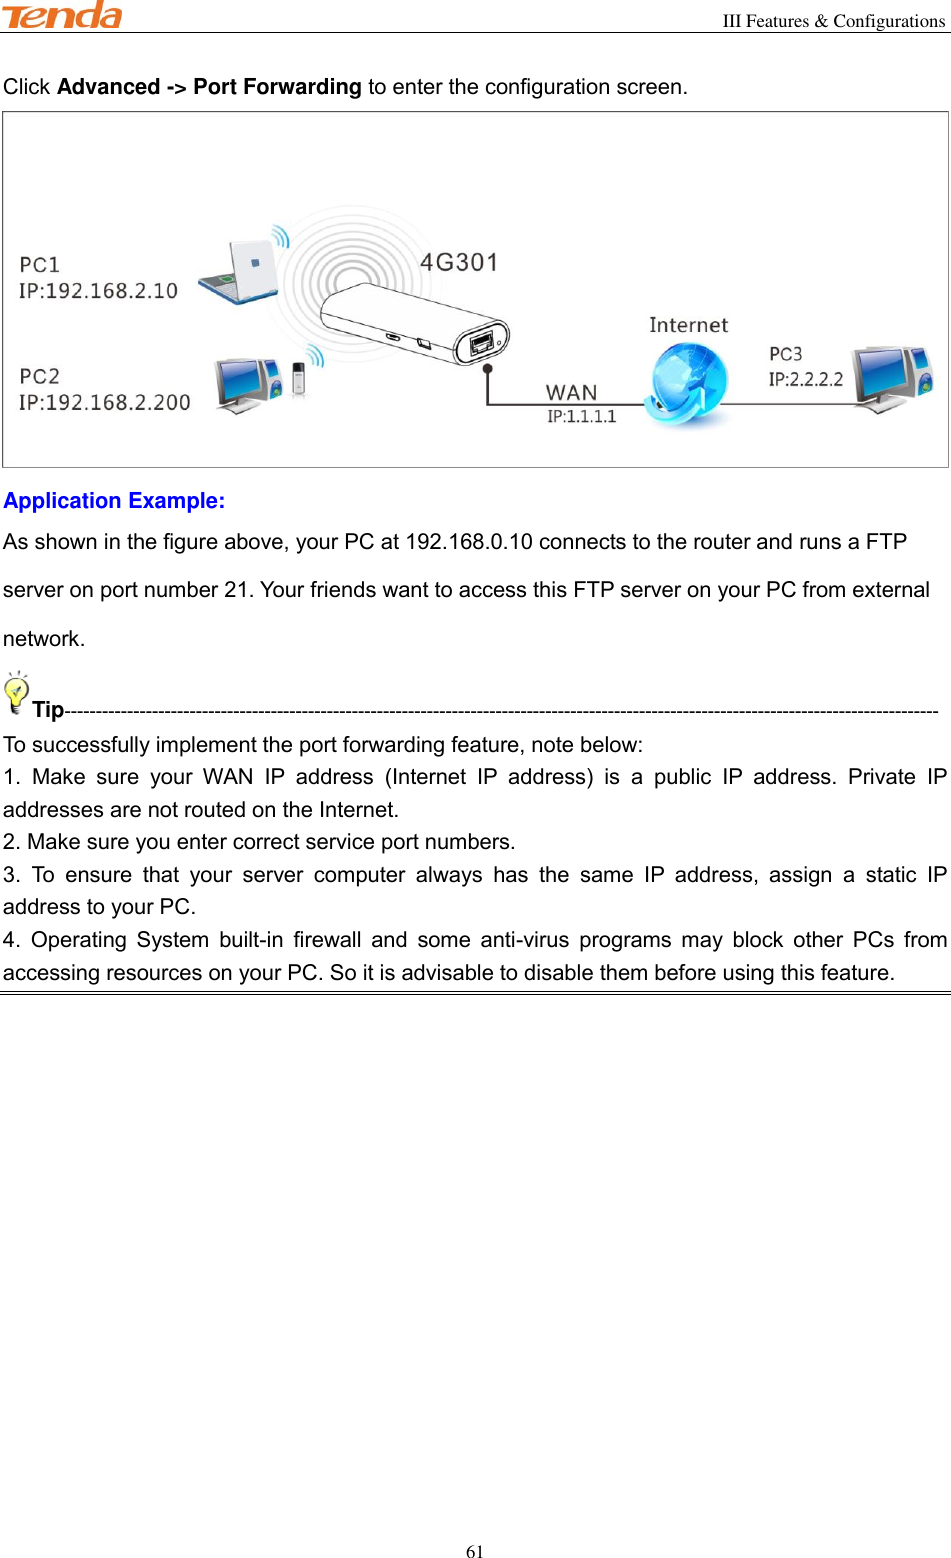                                                        III Features &amp; Configurations           61 Click Advanced -&gt; Port Forwarding to enter the configuration screen.  Application Example: As shown in the figure above, your PC at 192.168.0.10 connects to the router and runs a FTP server on port number 21. Your friends want to access this FTP server on your PC from external network. Tip-------------------------------------------------------------------------------------------------------------------------------------------- To successfully implement the port forwarding feature, note below: 1.  Make  sure  your  WAN  IP  address  (Internet  IP  address)  is  a  public  IP  address.  Private  IP addresses are not routed on the Internet. 2. Make sure you enter correct service port numbers. 3.  To  ensure  that  your  server  computer  always  has  the  same  IP  address,  assign  a  static  IP address to your PC. 4.  Operating  System  built-in  firewall  and  some  anti-virus  programs  may  block  other  PCs  from accessing resources on your PC. So it is advisable to disable them before using this feature. 